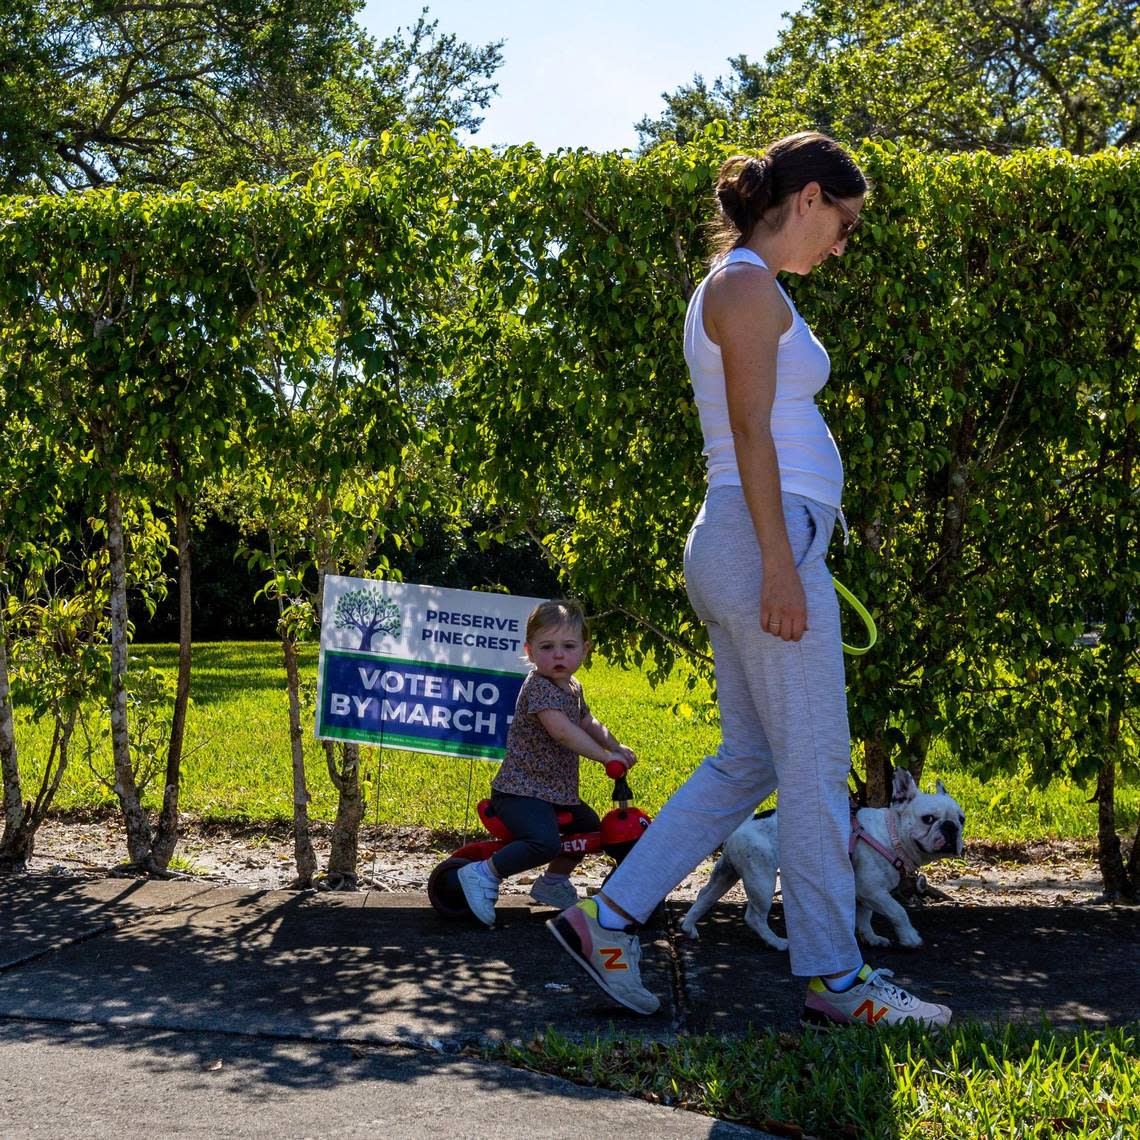 Pinecrest resident Corinne Bonner and her daughter Kiera and her dog Piggy walk past a sign that reads ‘VOTE NO’ in front of a resident’s yard in Pinecrest, Florida, on Wednesday, March 1, 2023. Bonner explained she already voted no on the new referendum.